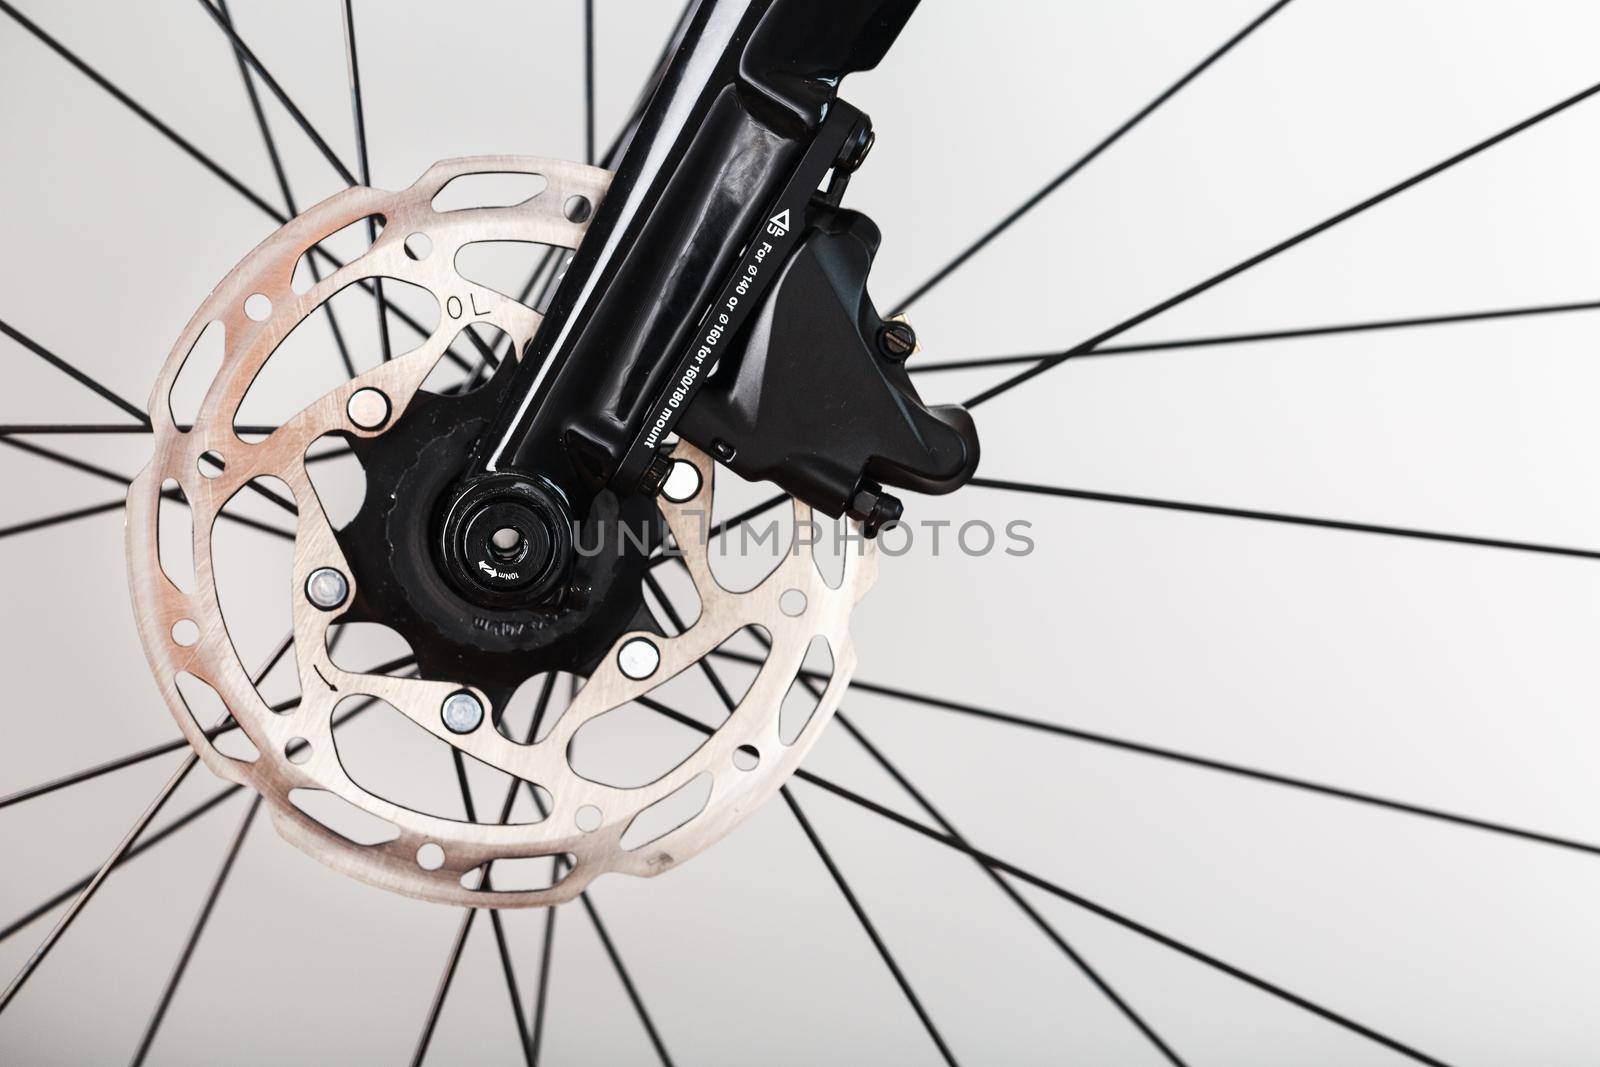 Bicycle Brake Rotor with Hydraulic Highway Braking System close-up by AlexGrec